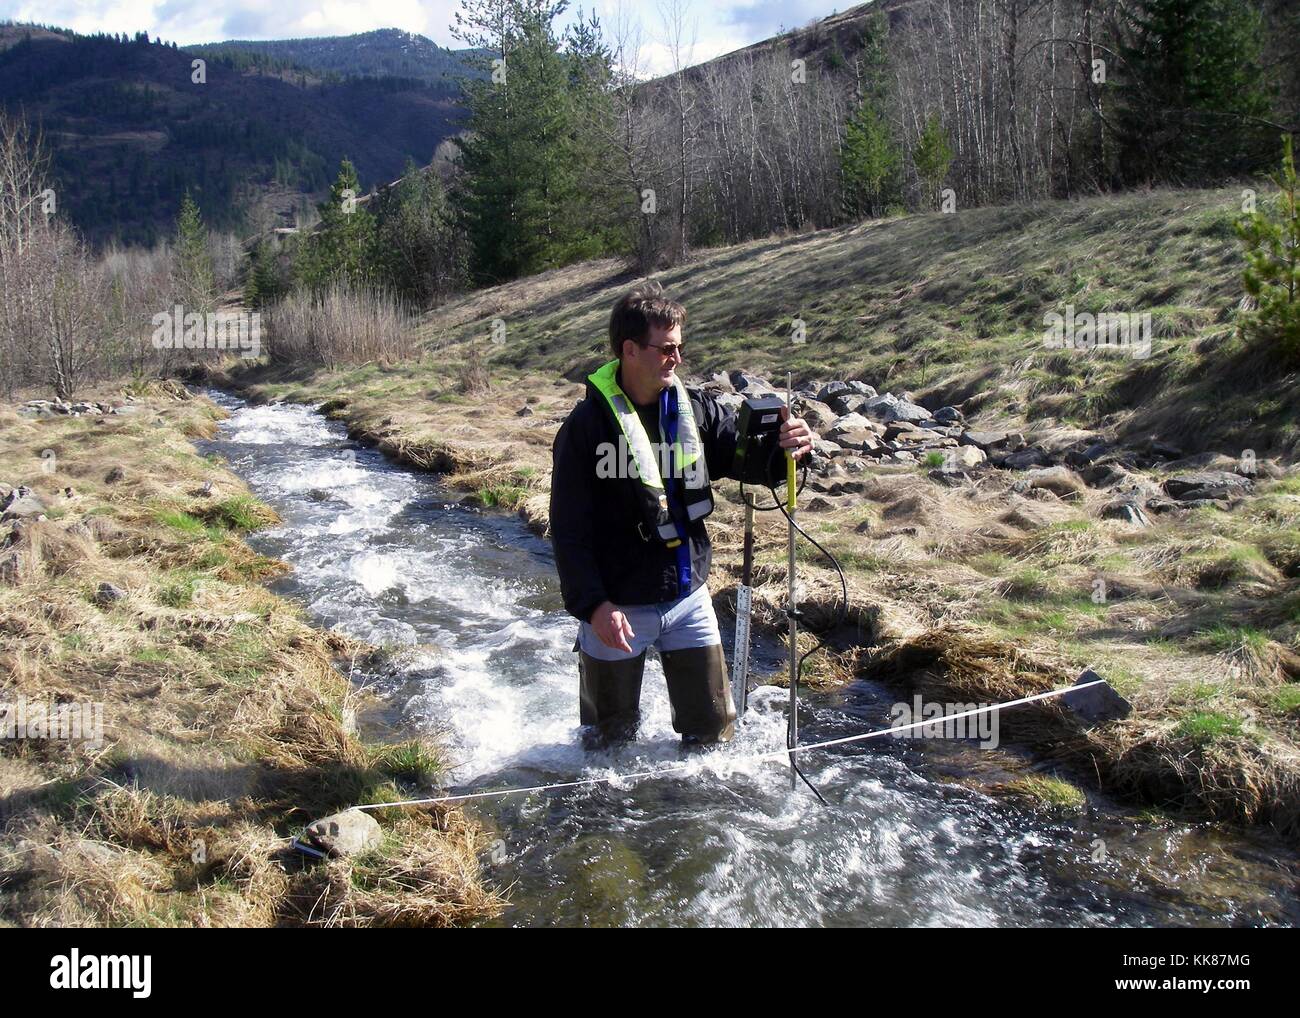 USGS hydrologist Greg Clark measures stream flow on Government Gulch Creek, a tributary to the Coeur d'Alene River in northern Idaho. Image courtesy Deena Green/USGS, 2014. Stock Photo